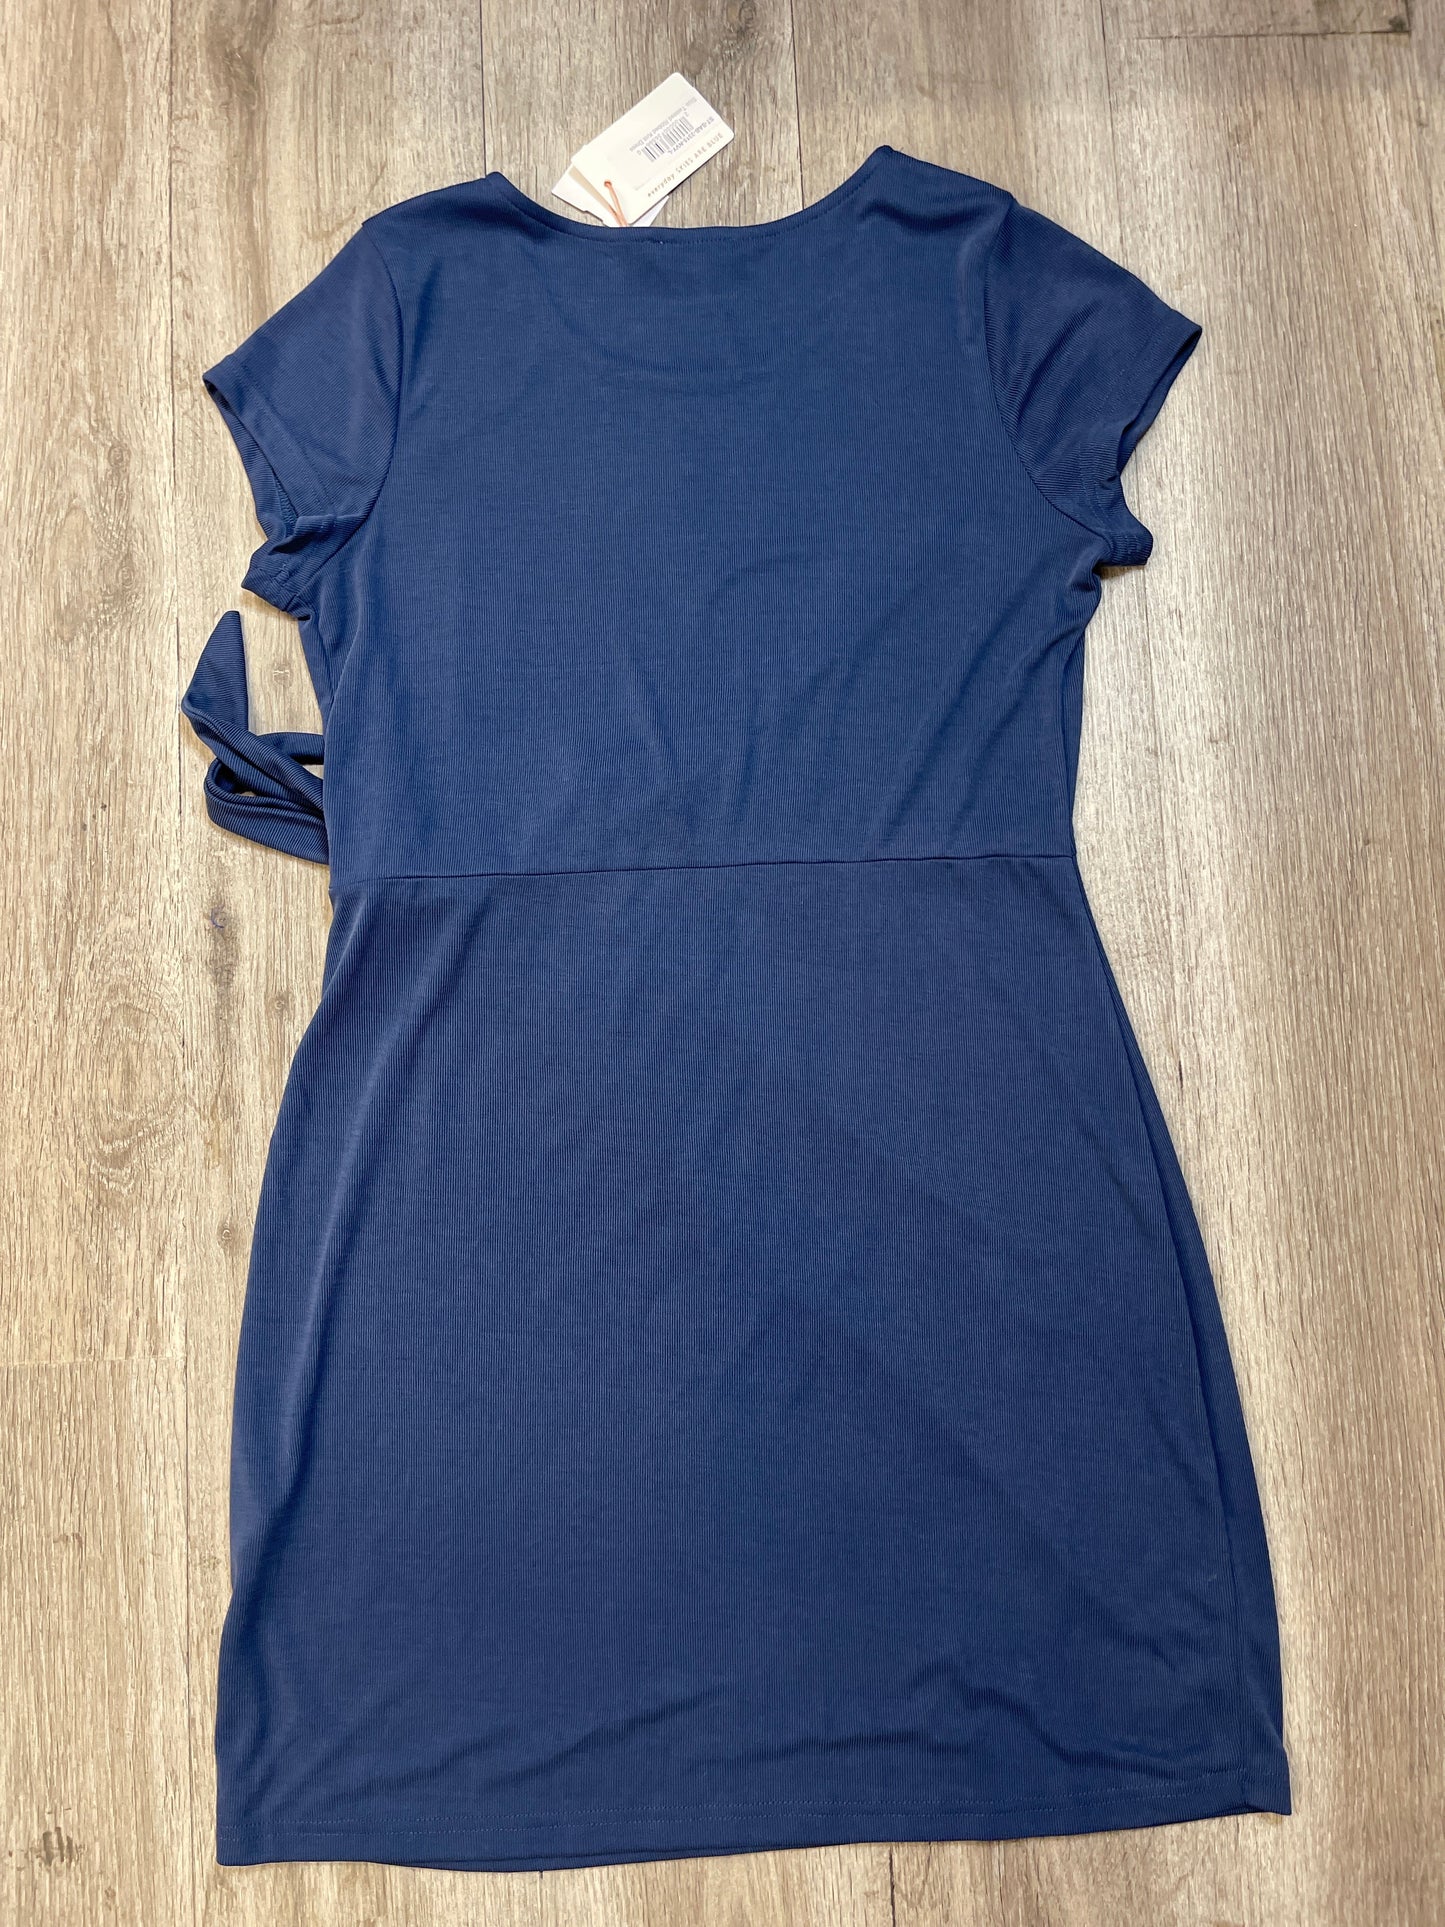 Dress Casual Short By Skies Are Blue  Size: L